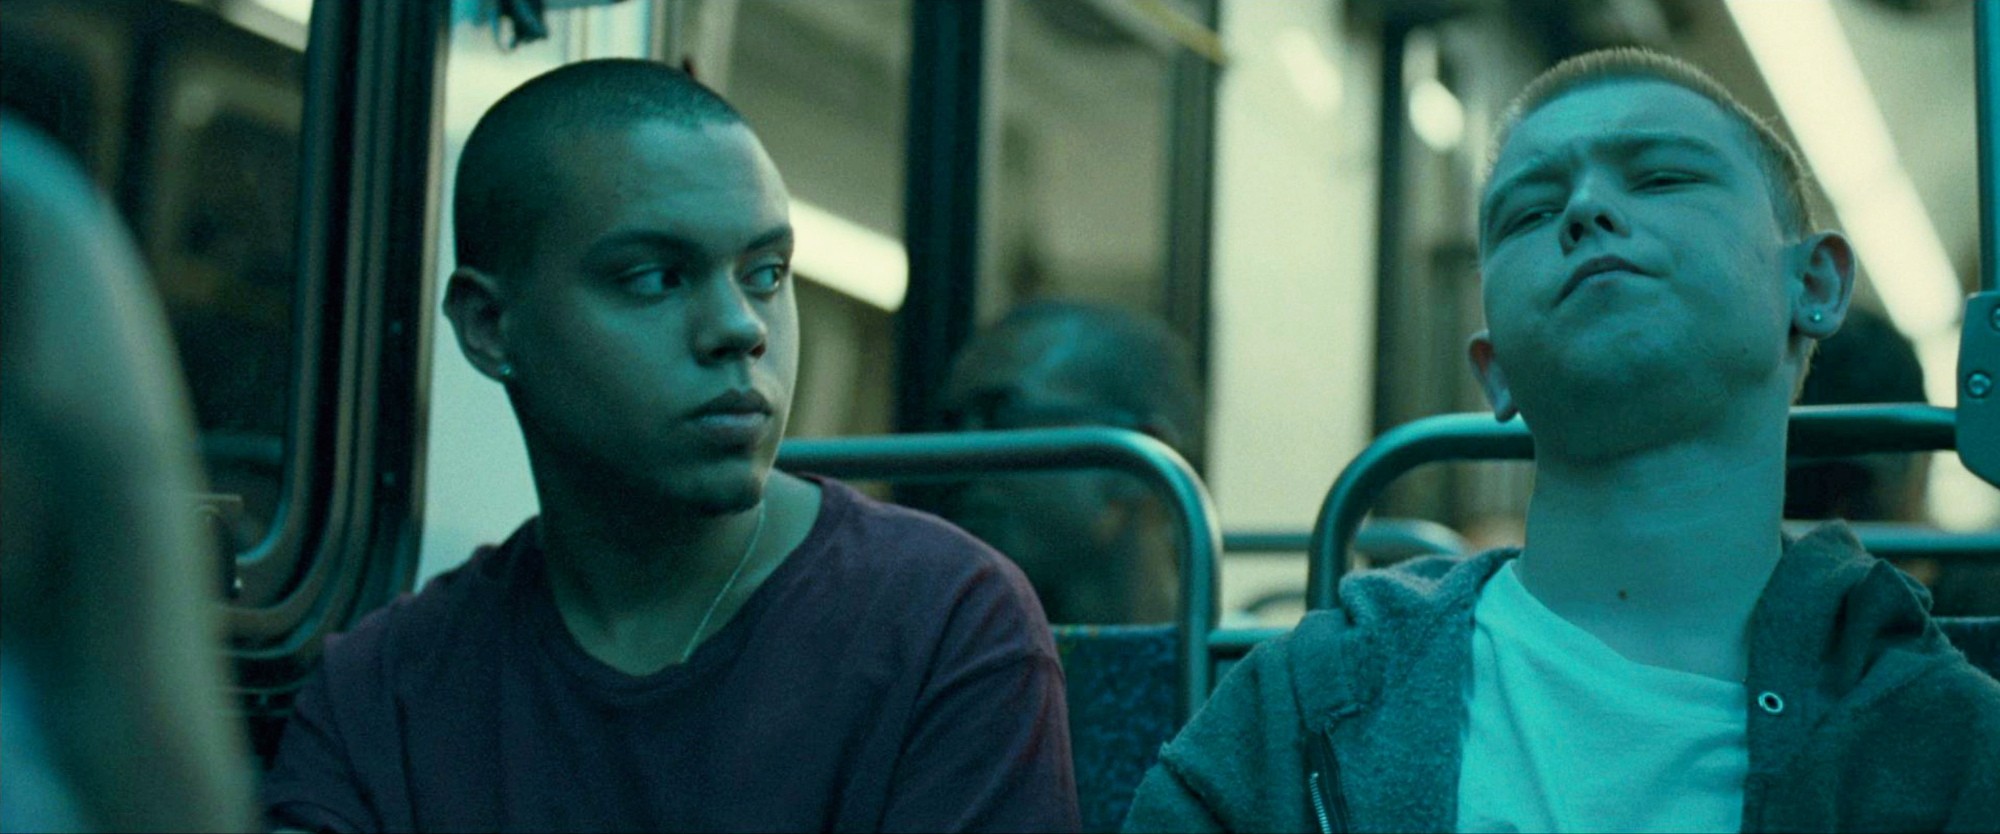 Evan Ross stars as Dre and Jonathan Michael Trautmann stars as Kevin in ARC Entertainment's 96 Minutes (2012)